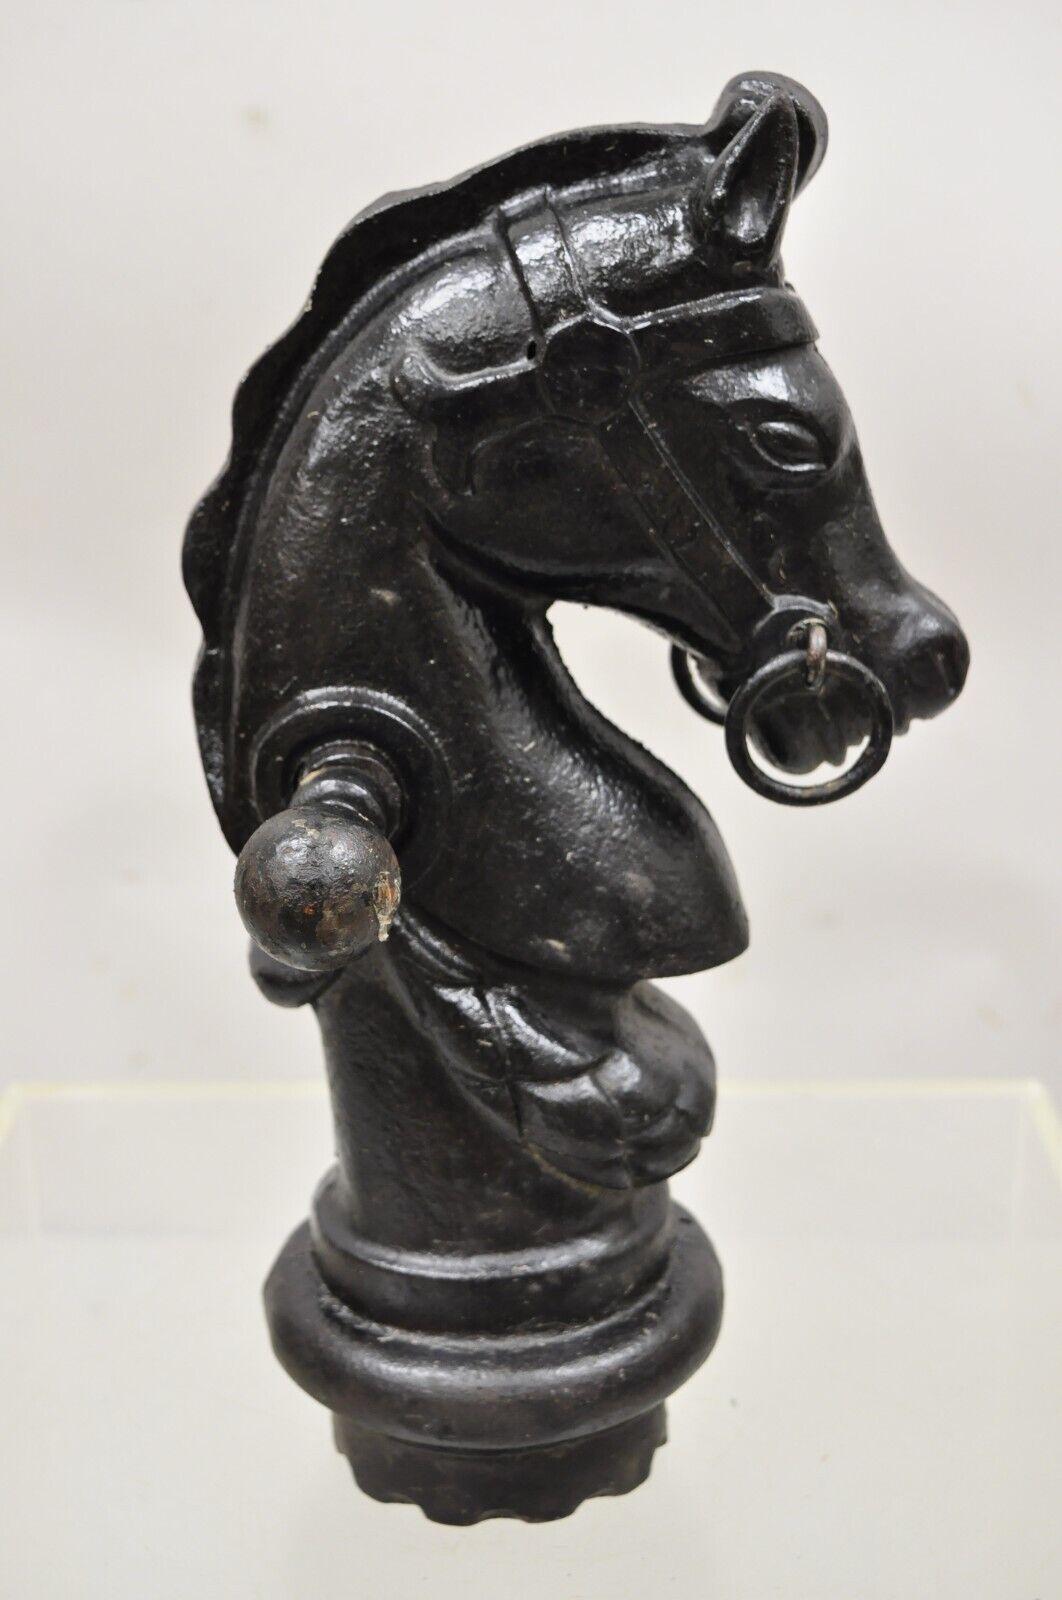 Antique 19th century cast iron horse head hitching post early American (B). Item features heavy cast iron construction, remarkable detail, black painted finish, very nice antique item, approx. 30 lbs. Circa 19th century. Measurements: 15